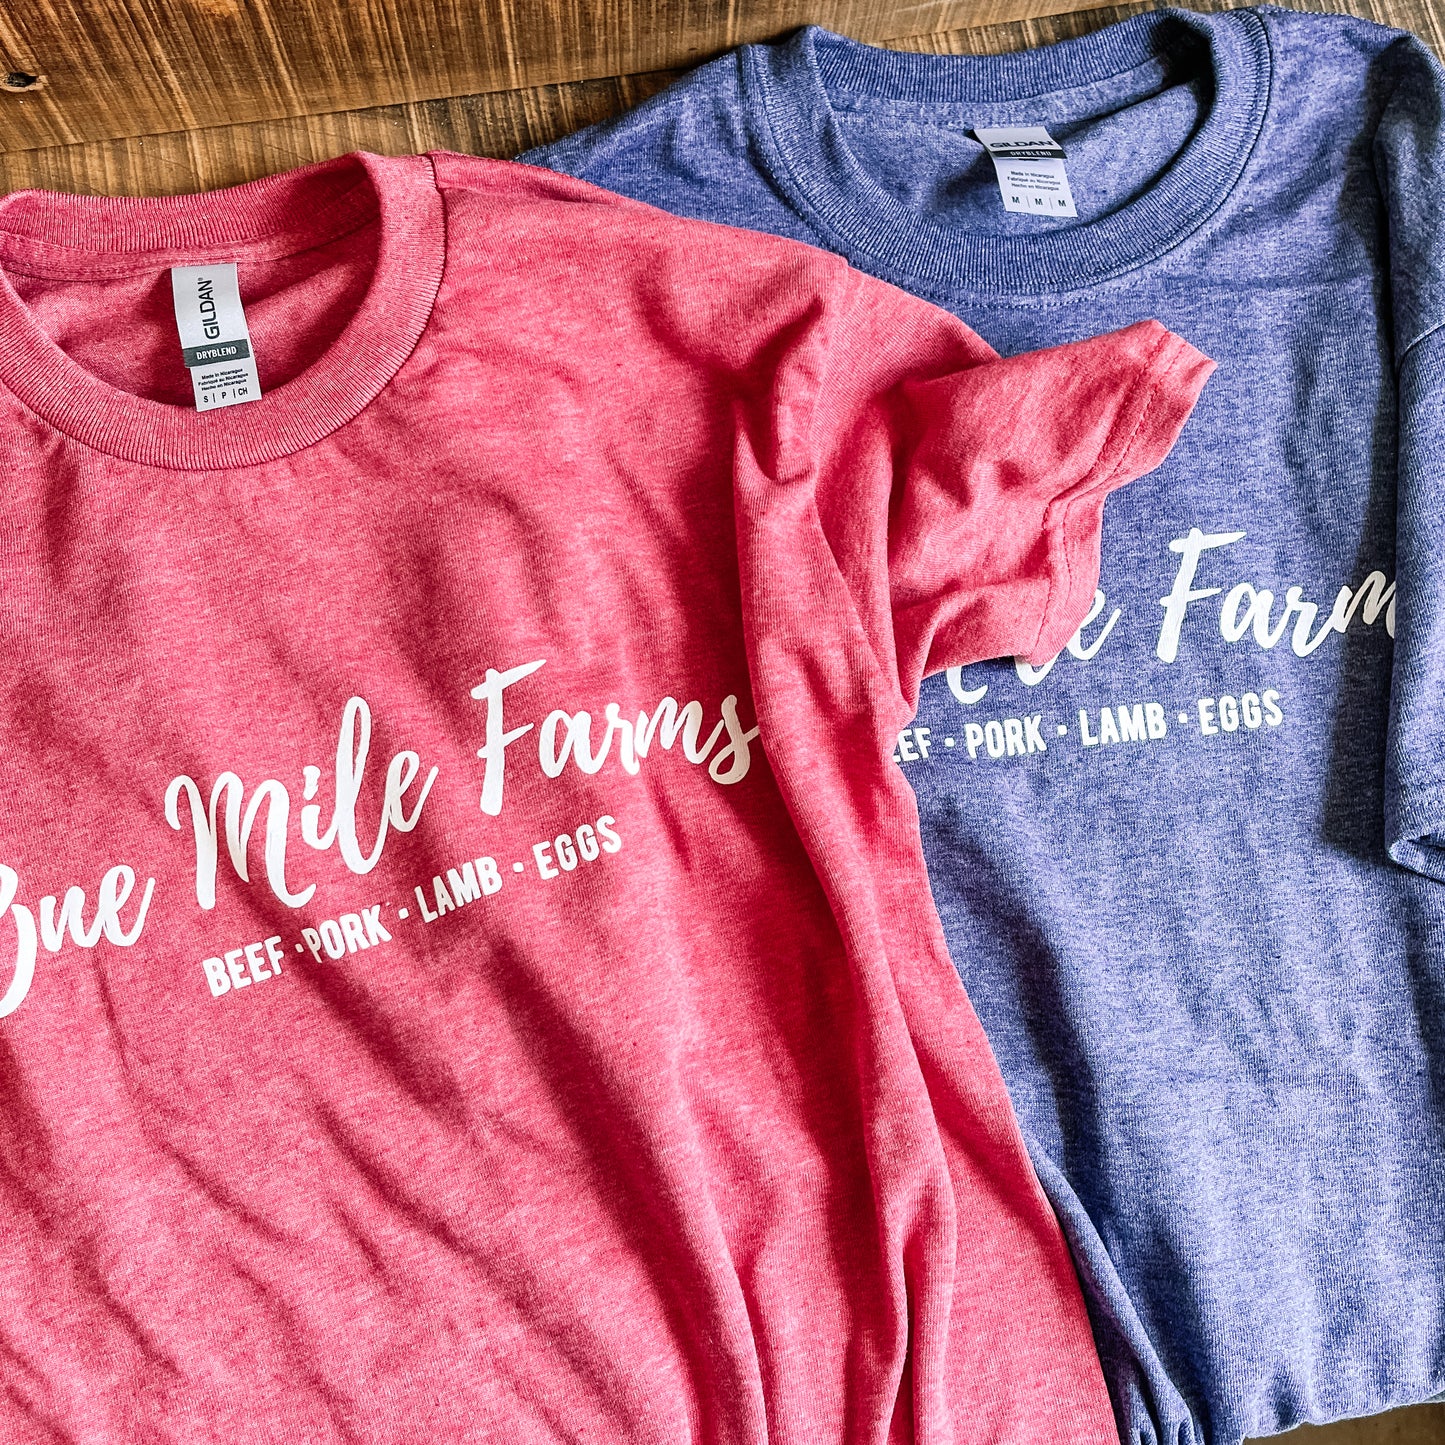 One Mile Farms T-Shirt